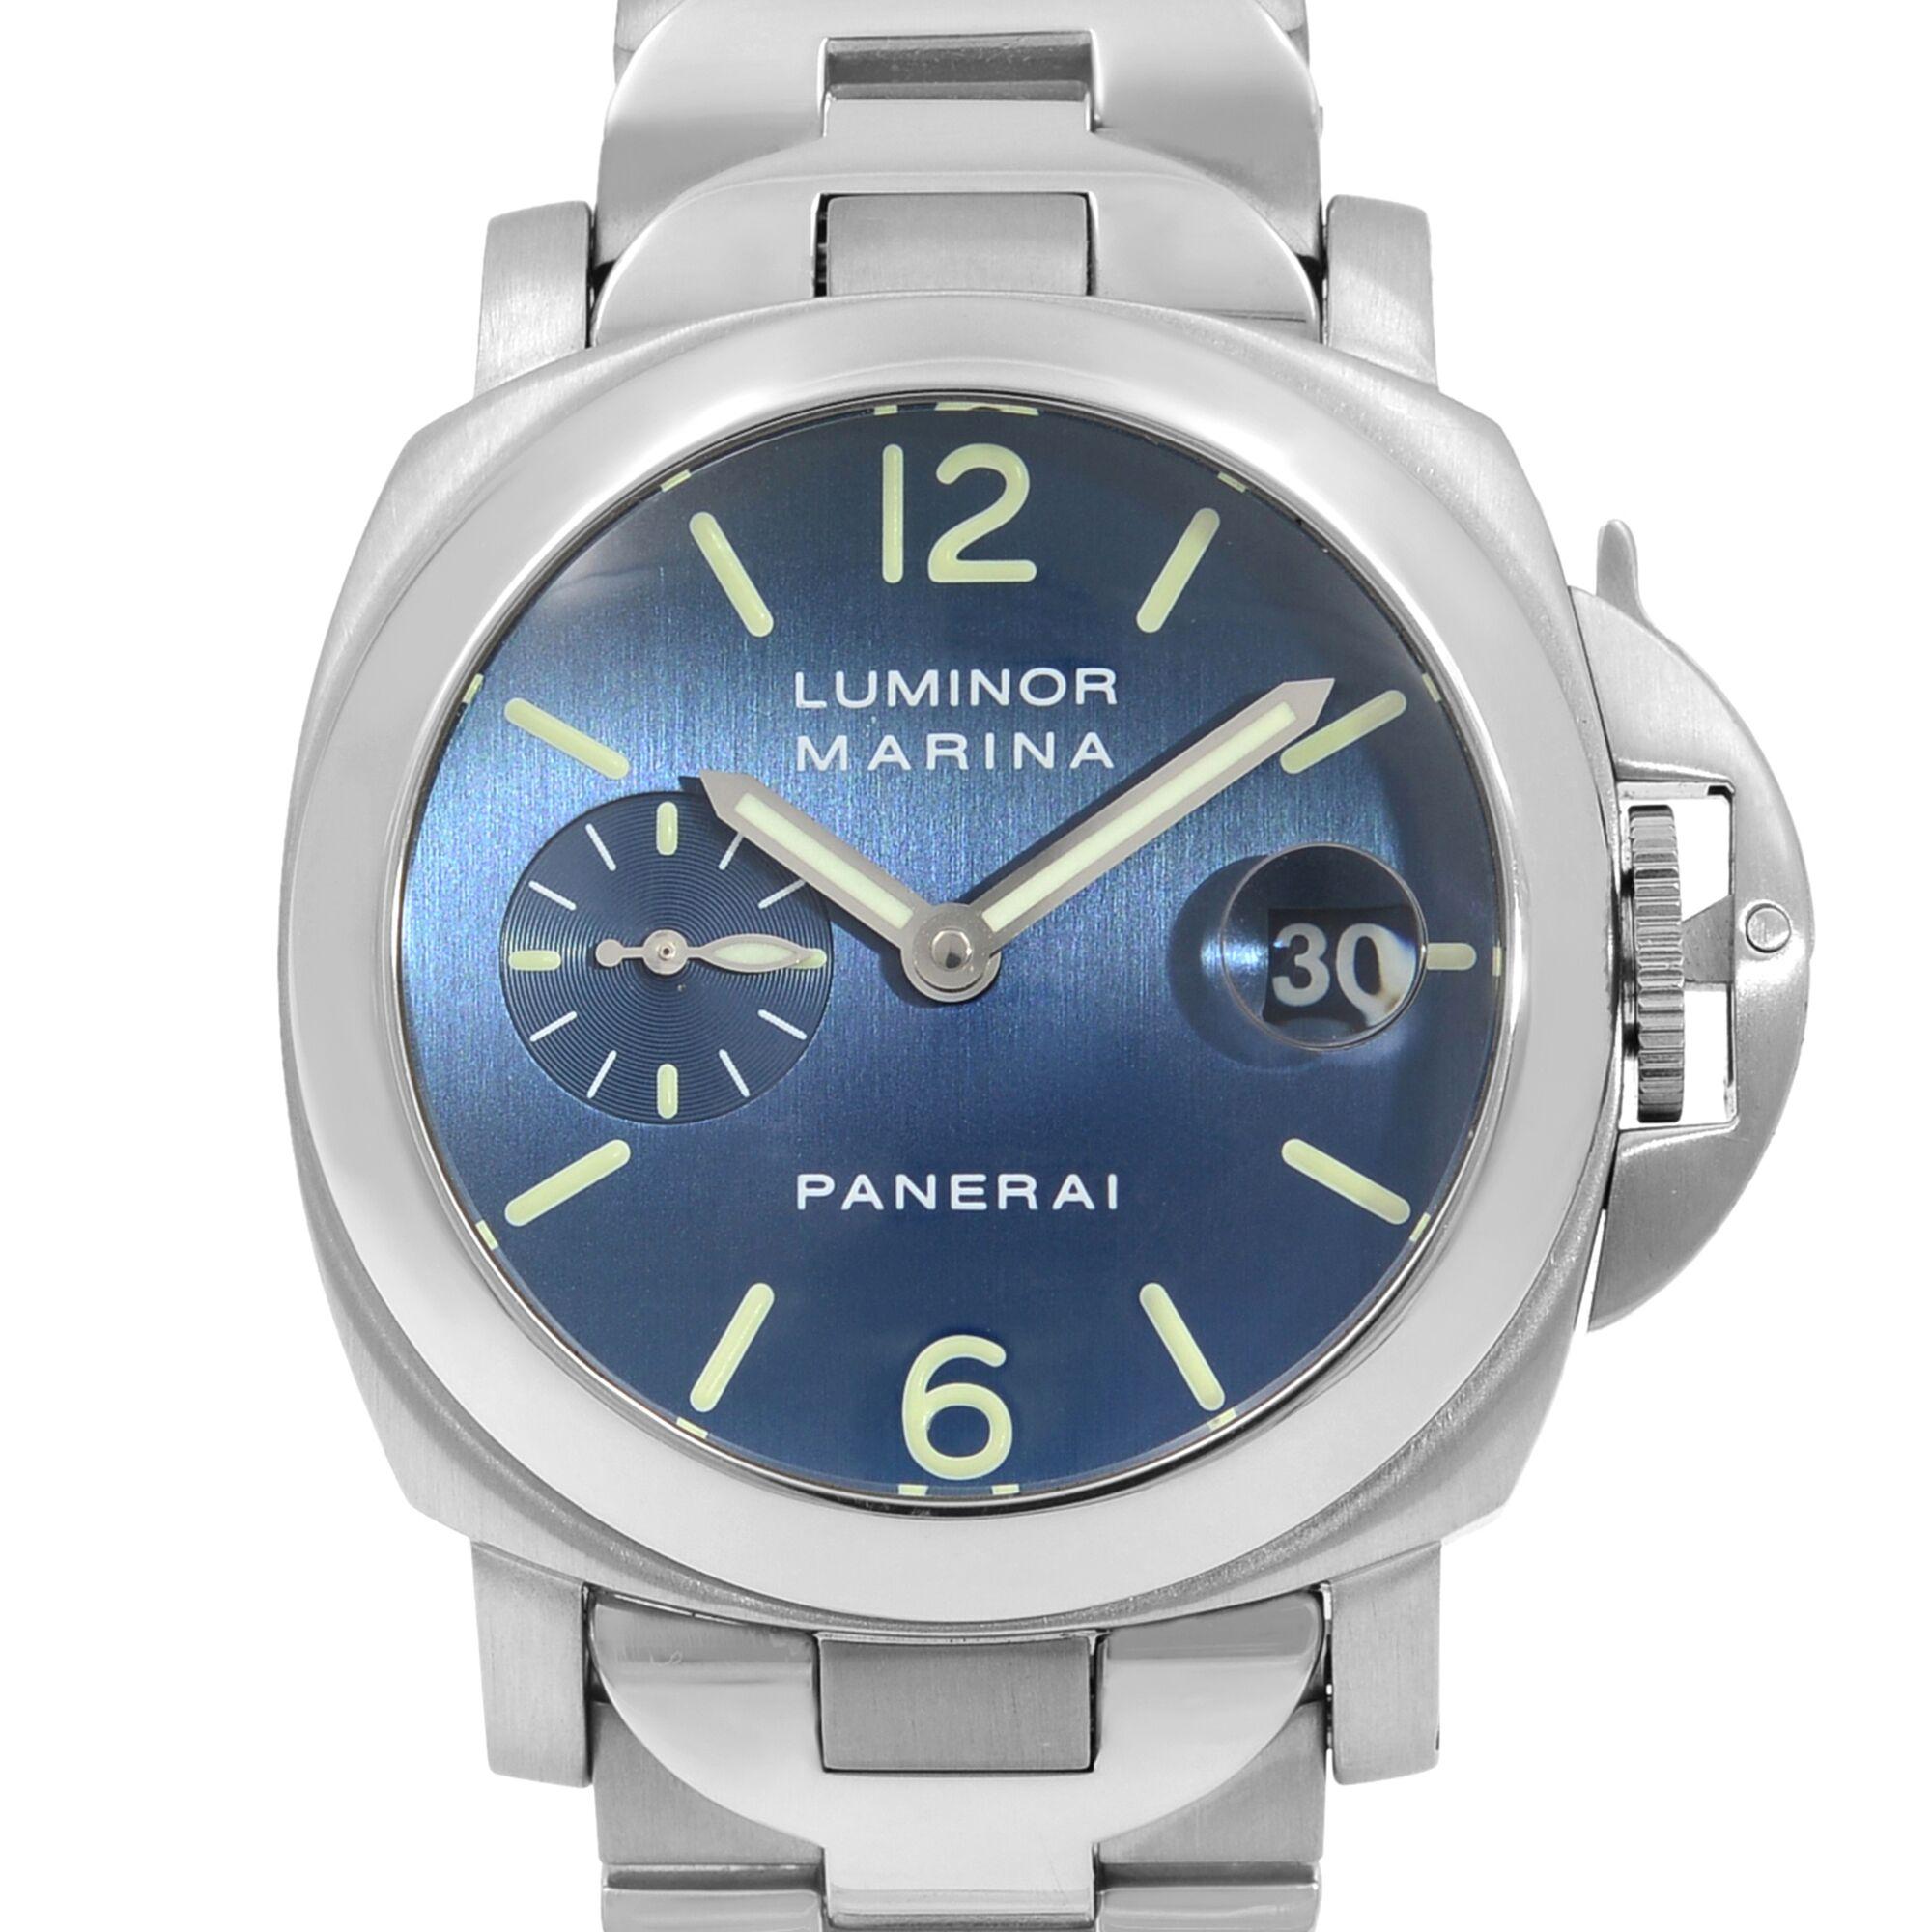 This pre-owned Panerai Luminor  PAM00120 is a beautiful men's timepiece that is powered by mechanical (automatic) movement which is cased in a stainless steel case. It has a round shape face, date indicator, small seconds subdial dial and has hand